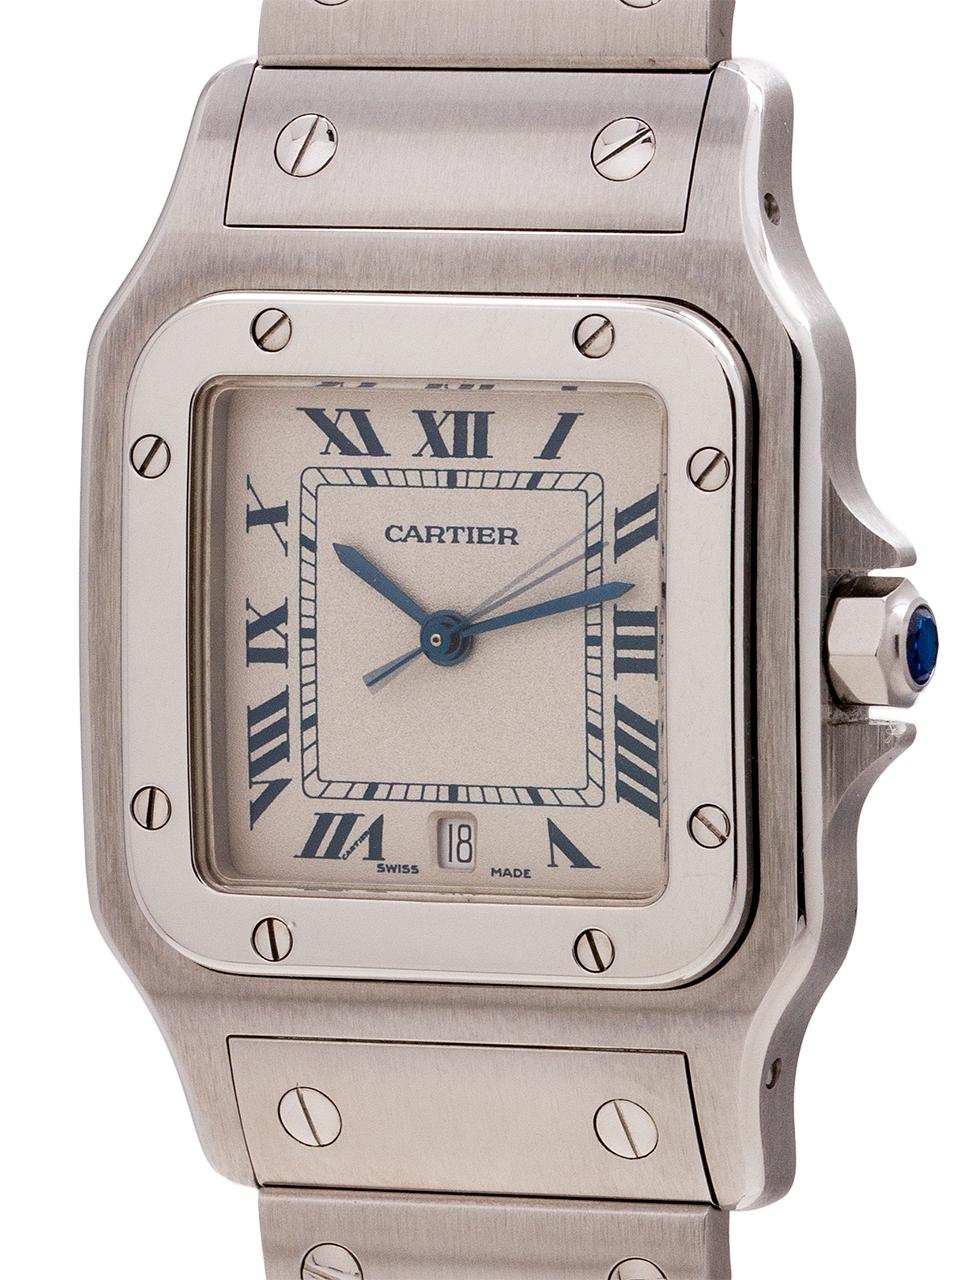 
Exceptional condition man's Cartier Santos Galbe in stainless steel, circa 1999. Featuring a 29 x 41mm ergonomically curved back case, with curved sapphire crystal and curved links to conform to the wrist. Classic white dial with black Roman